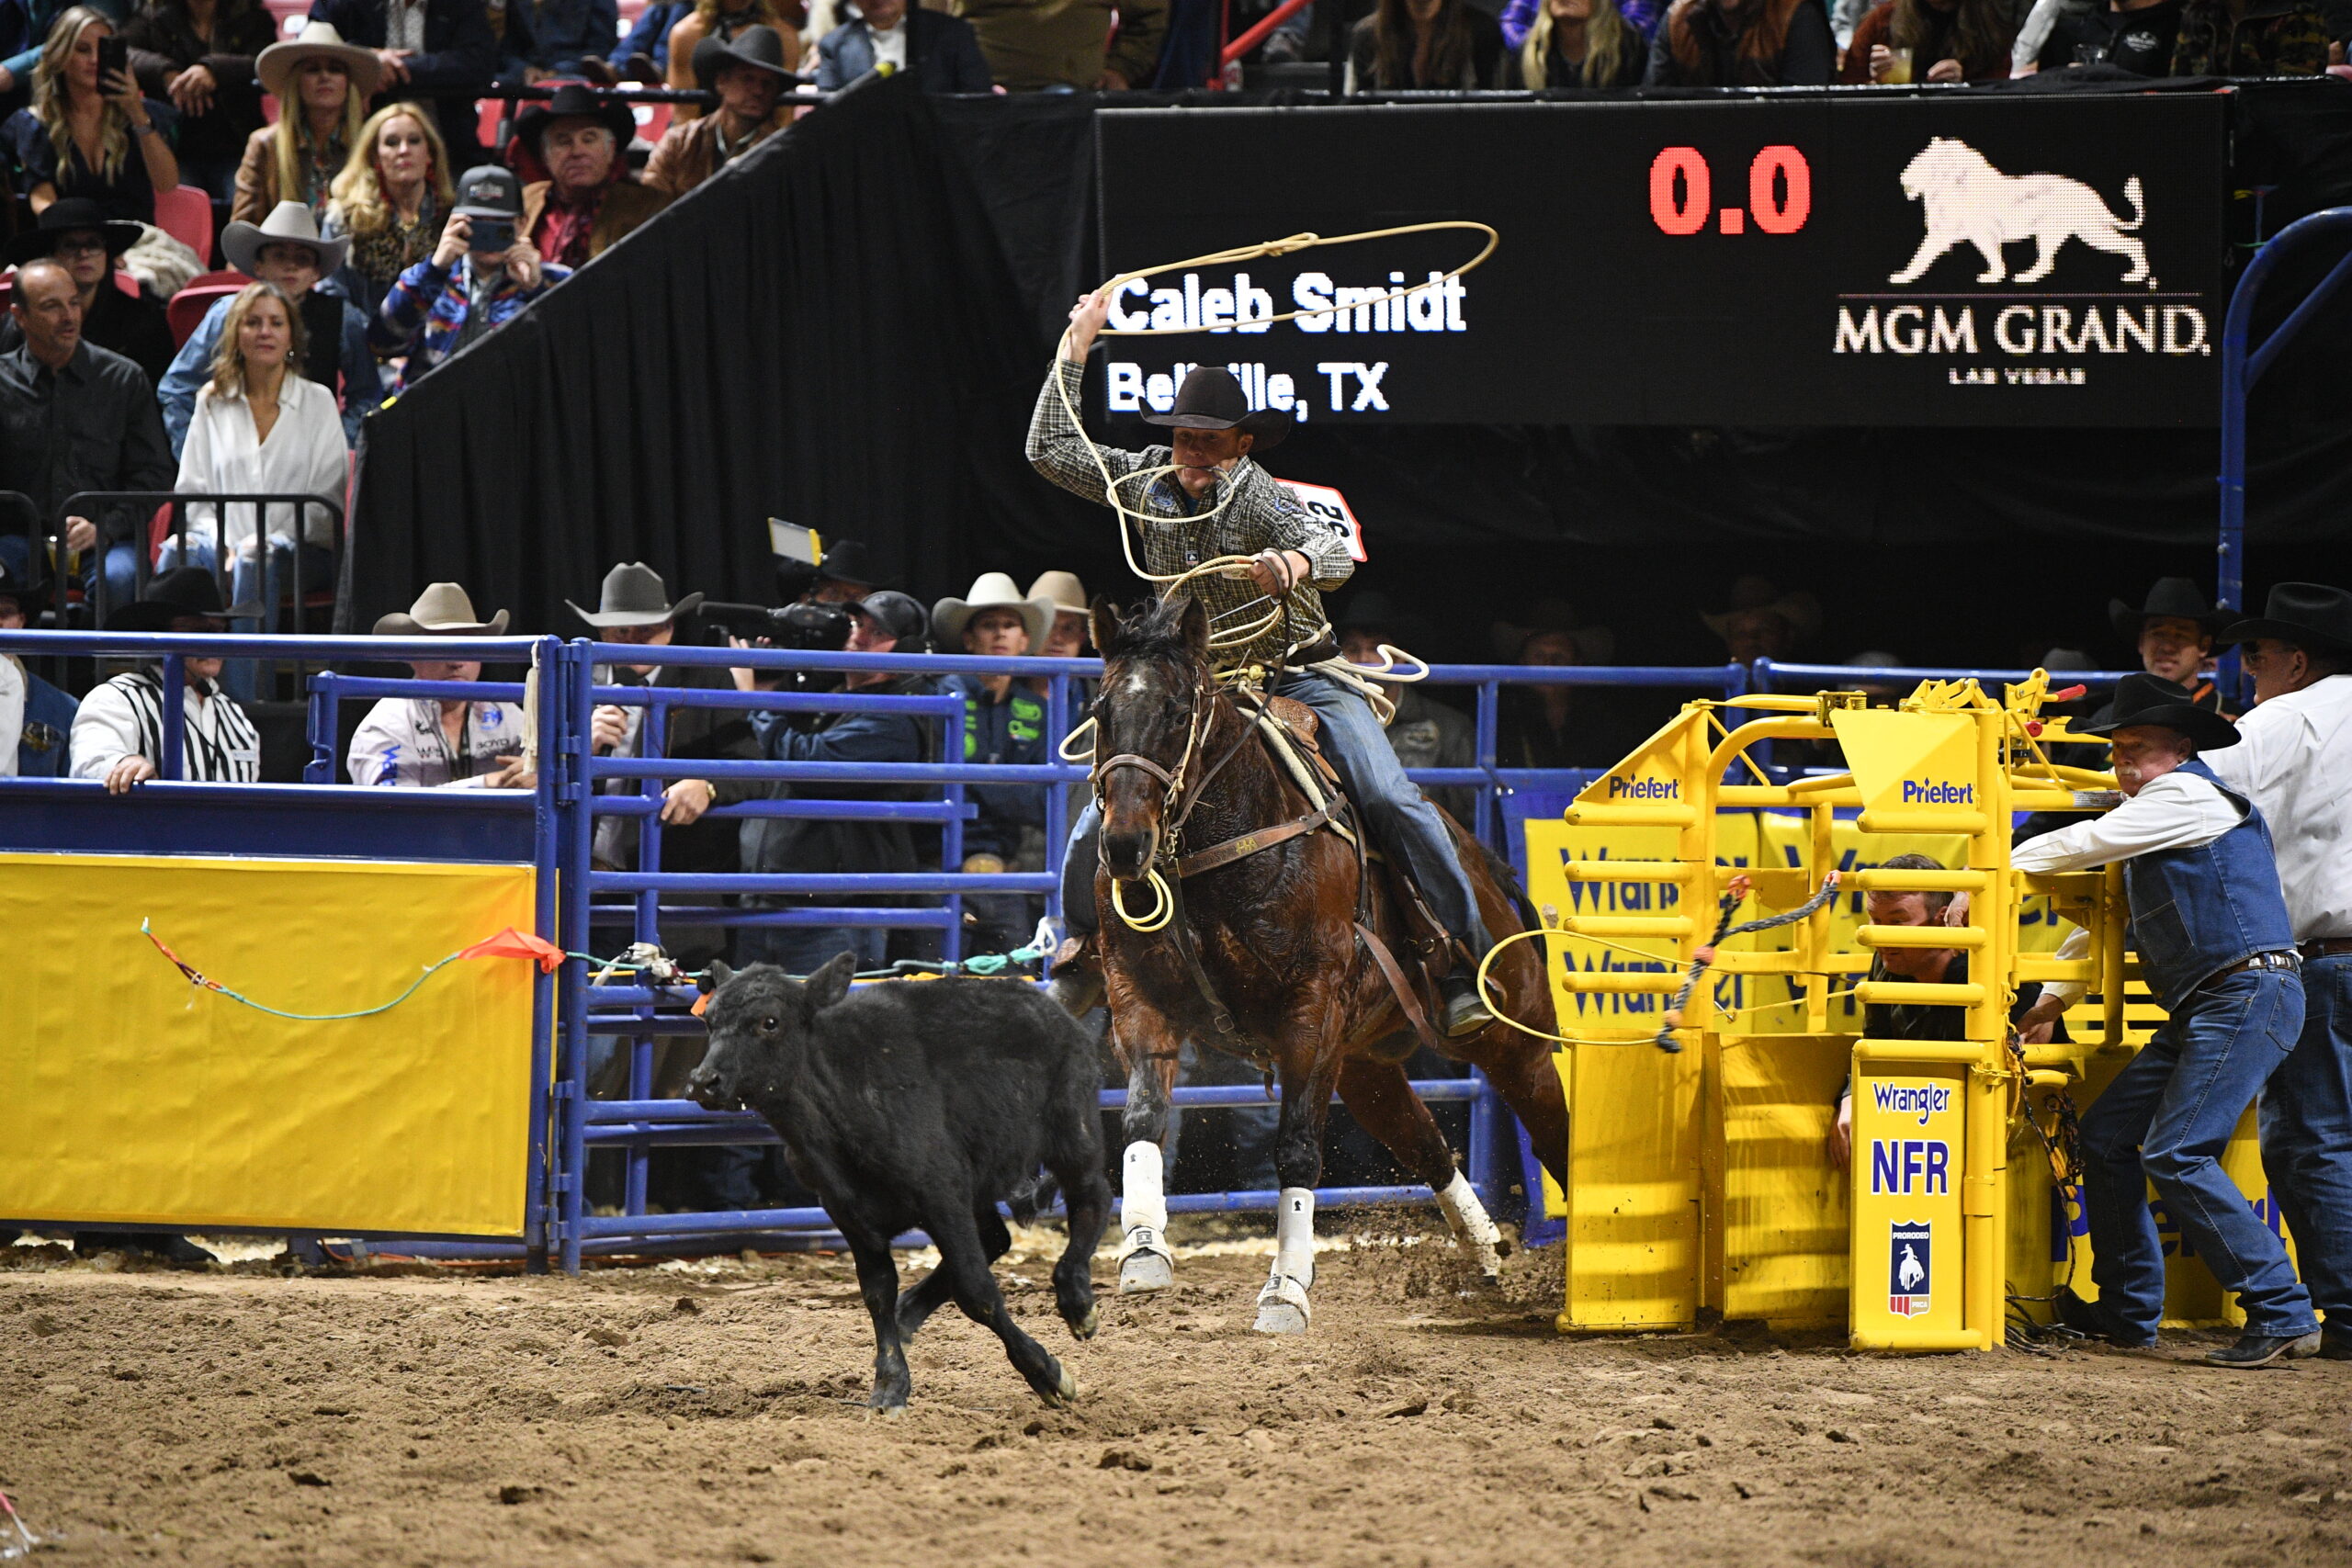 Caleb Smidt came back from an infuriating Round 1 mistake to win Round 2 at the 2023 NFR.